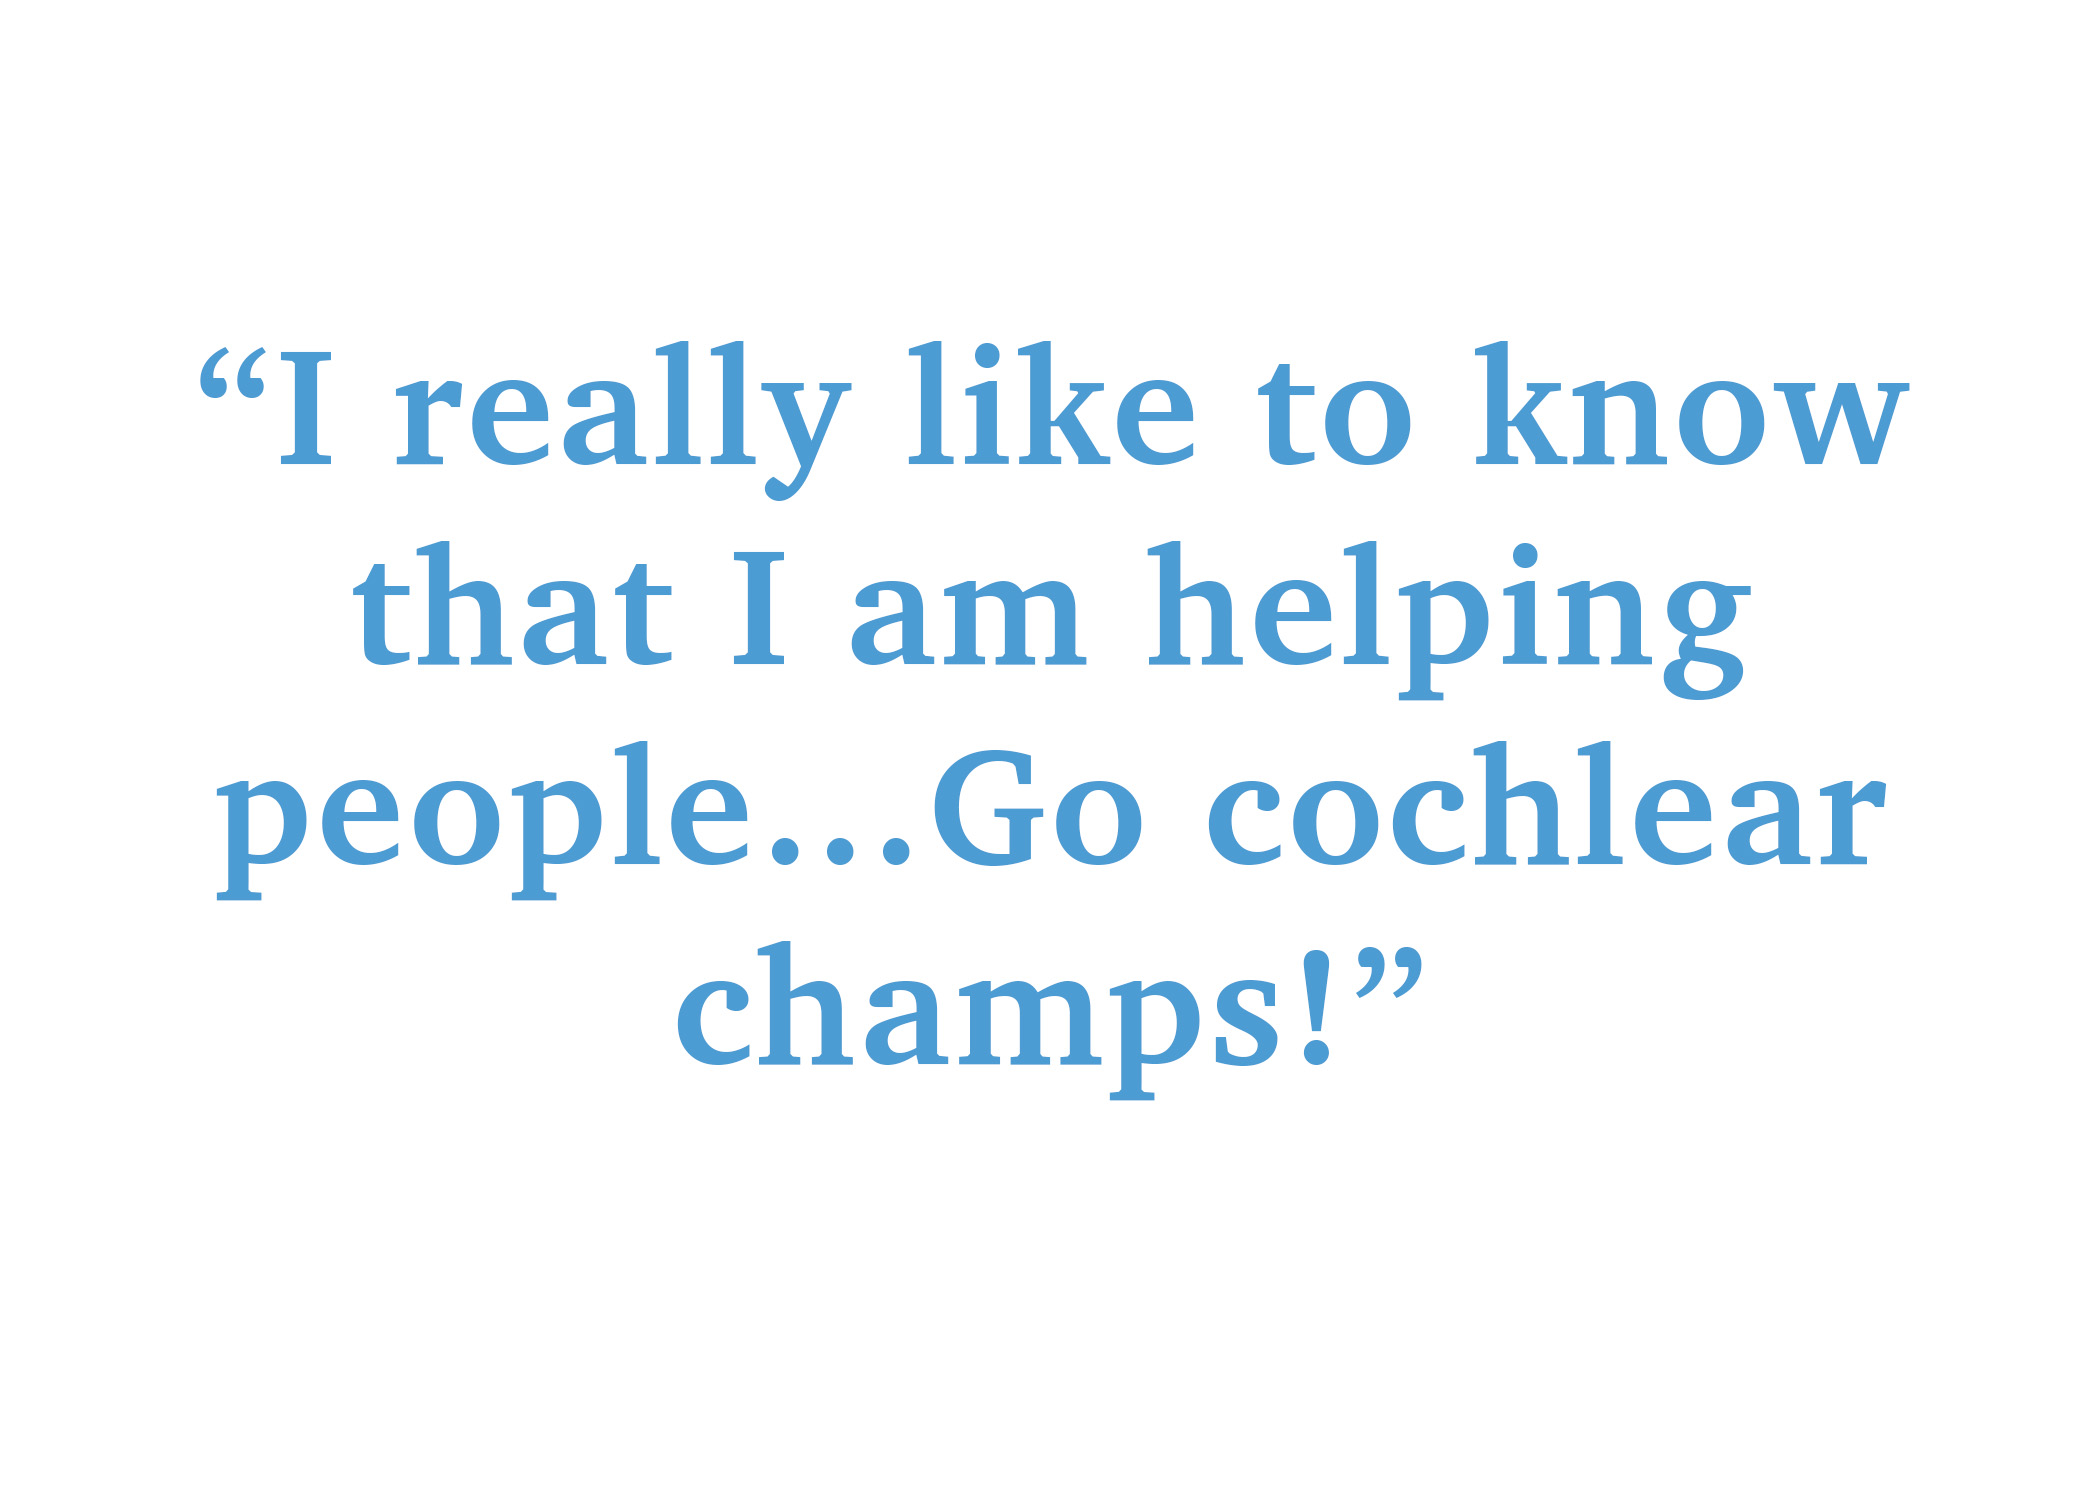 I really like to know that I am helping people. Go cochlear champs!